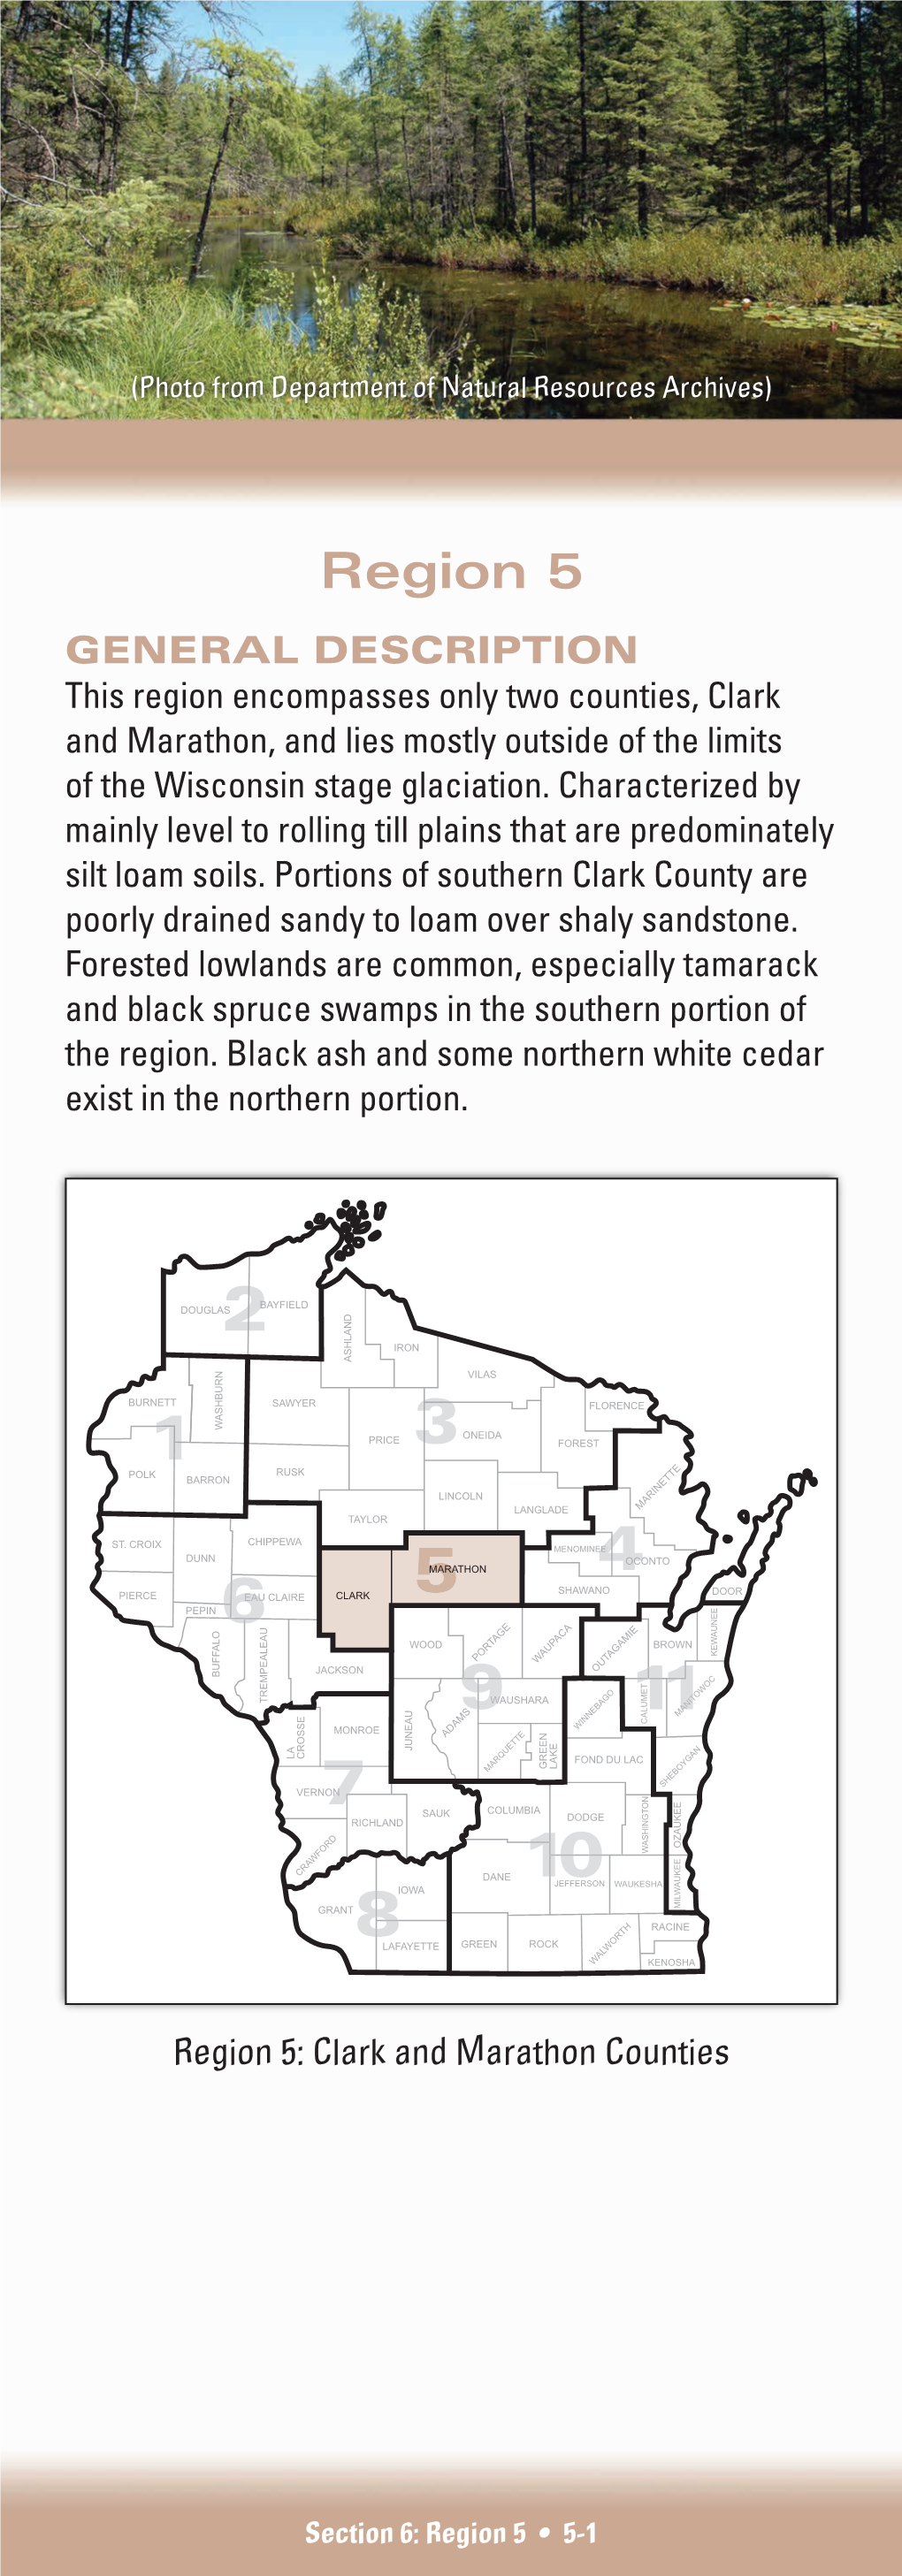 Region 5 GENERAL DESCRIPTION This Region Encompasses Only Two Counties, Clark and Marathon, and Lies Mostly Outside of the Limits of the Wisconsin Stage Glaciation